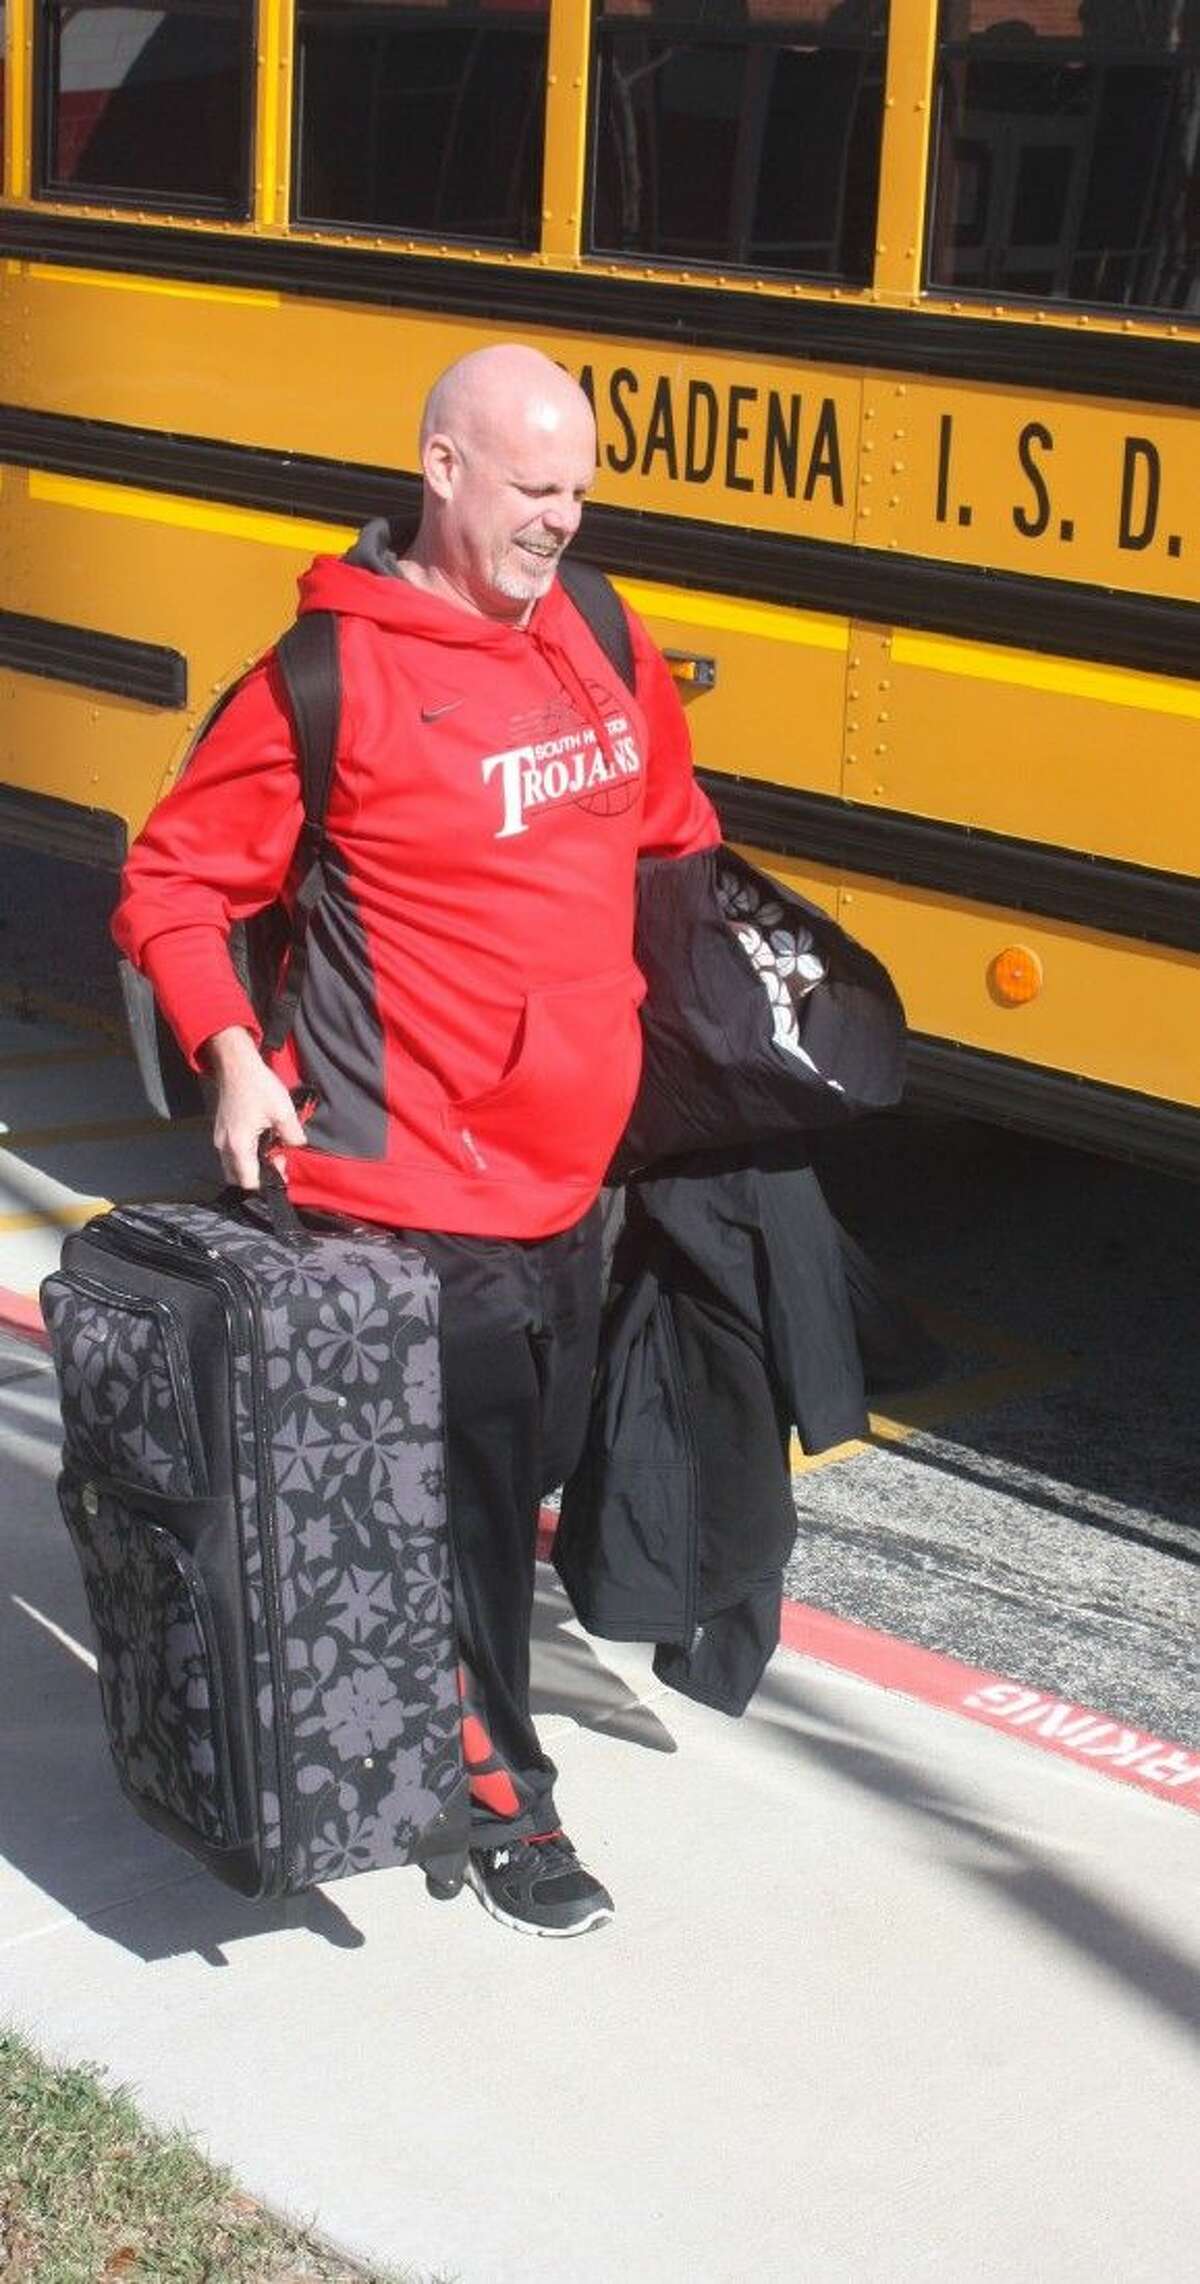 With suitcase and pillow, South Houston High School varsity boys basketball coach Patrick McCoy is all ready for his team's trip to Waco Monday afternoon. The red-hot Trojans, off to a 4-1 start in district, could see as many as four games in the Waco Tournament before returning home and the last 11 contests of district.